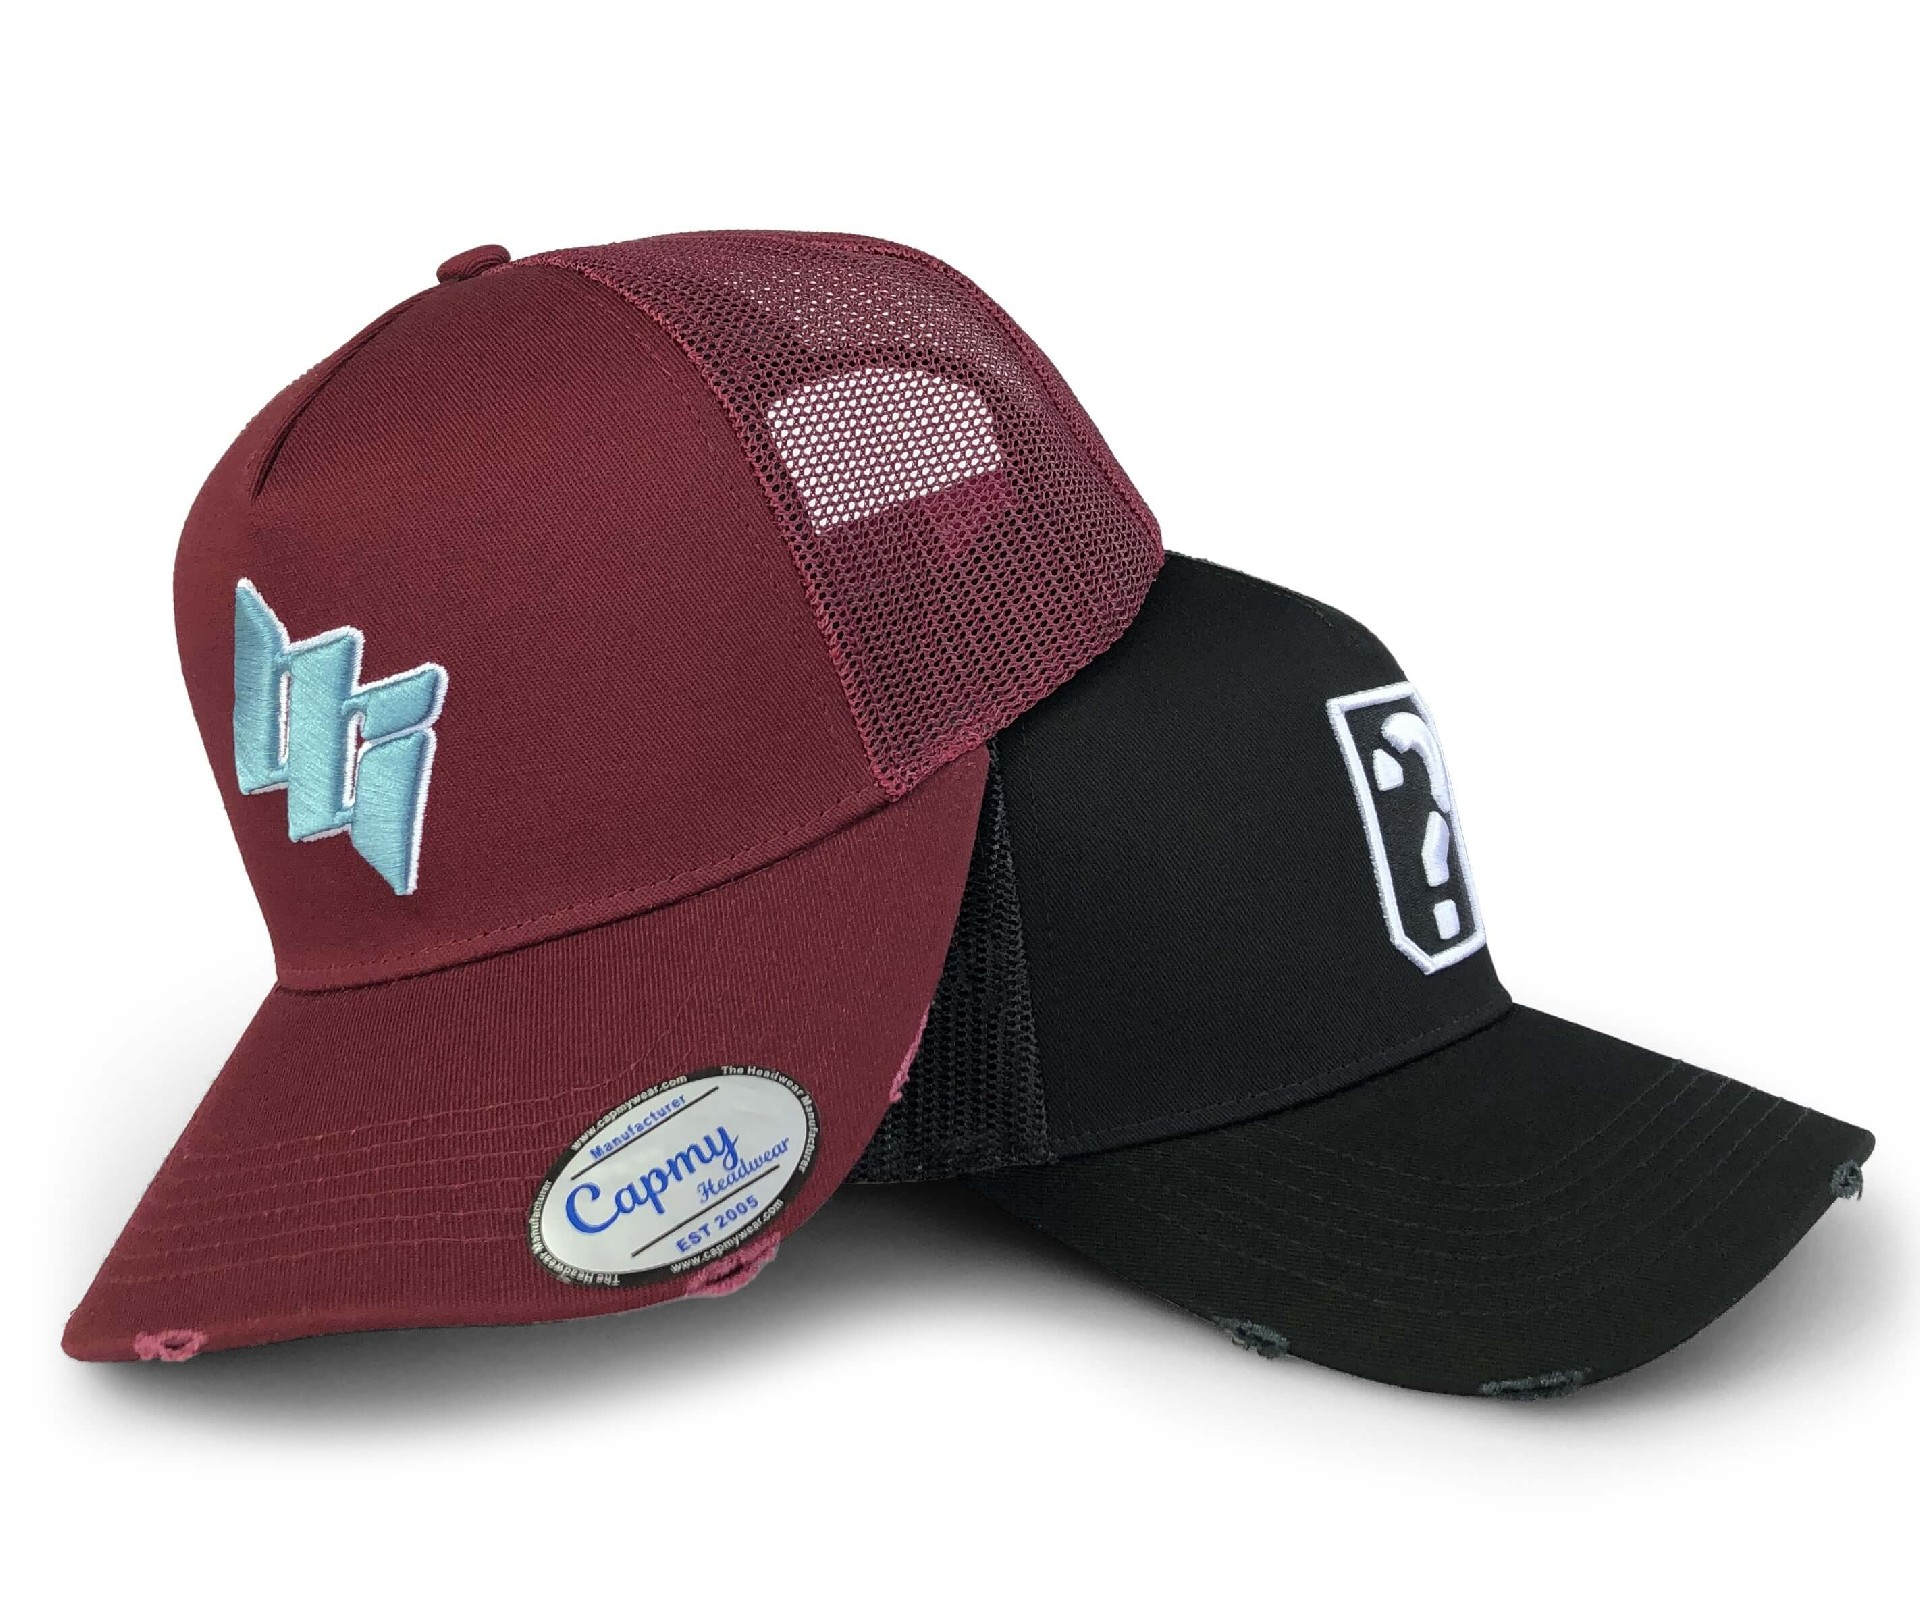 CMC-3119(Customized Cotton 5 Panel Embroidery New Mesh Trucker Cap With Vintage Distressed Rip Trucker Hats)